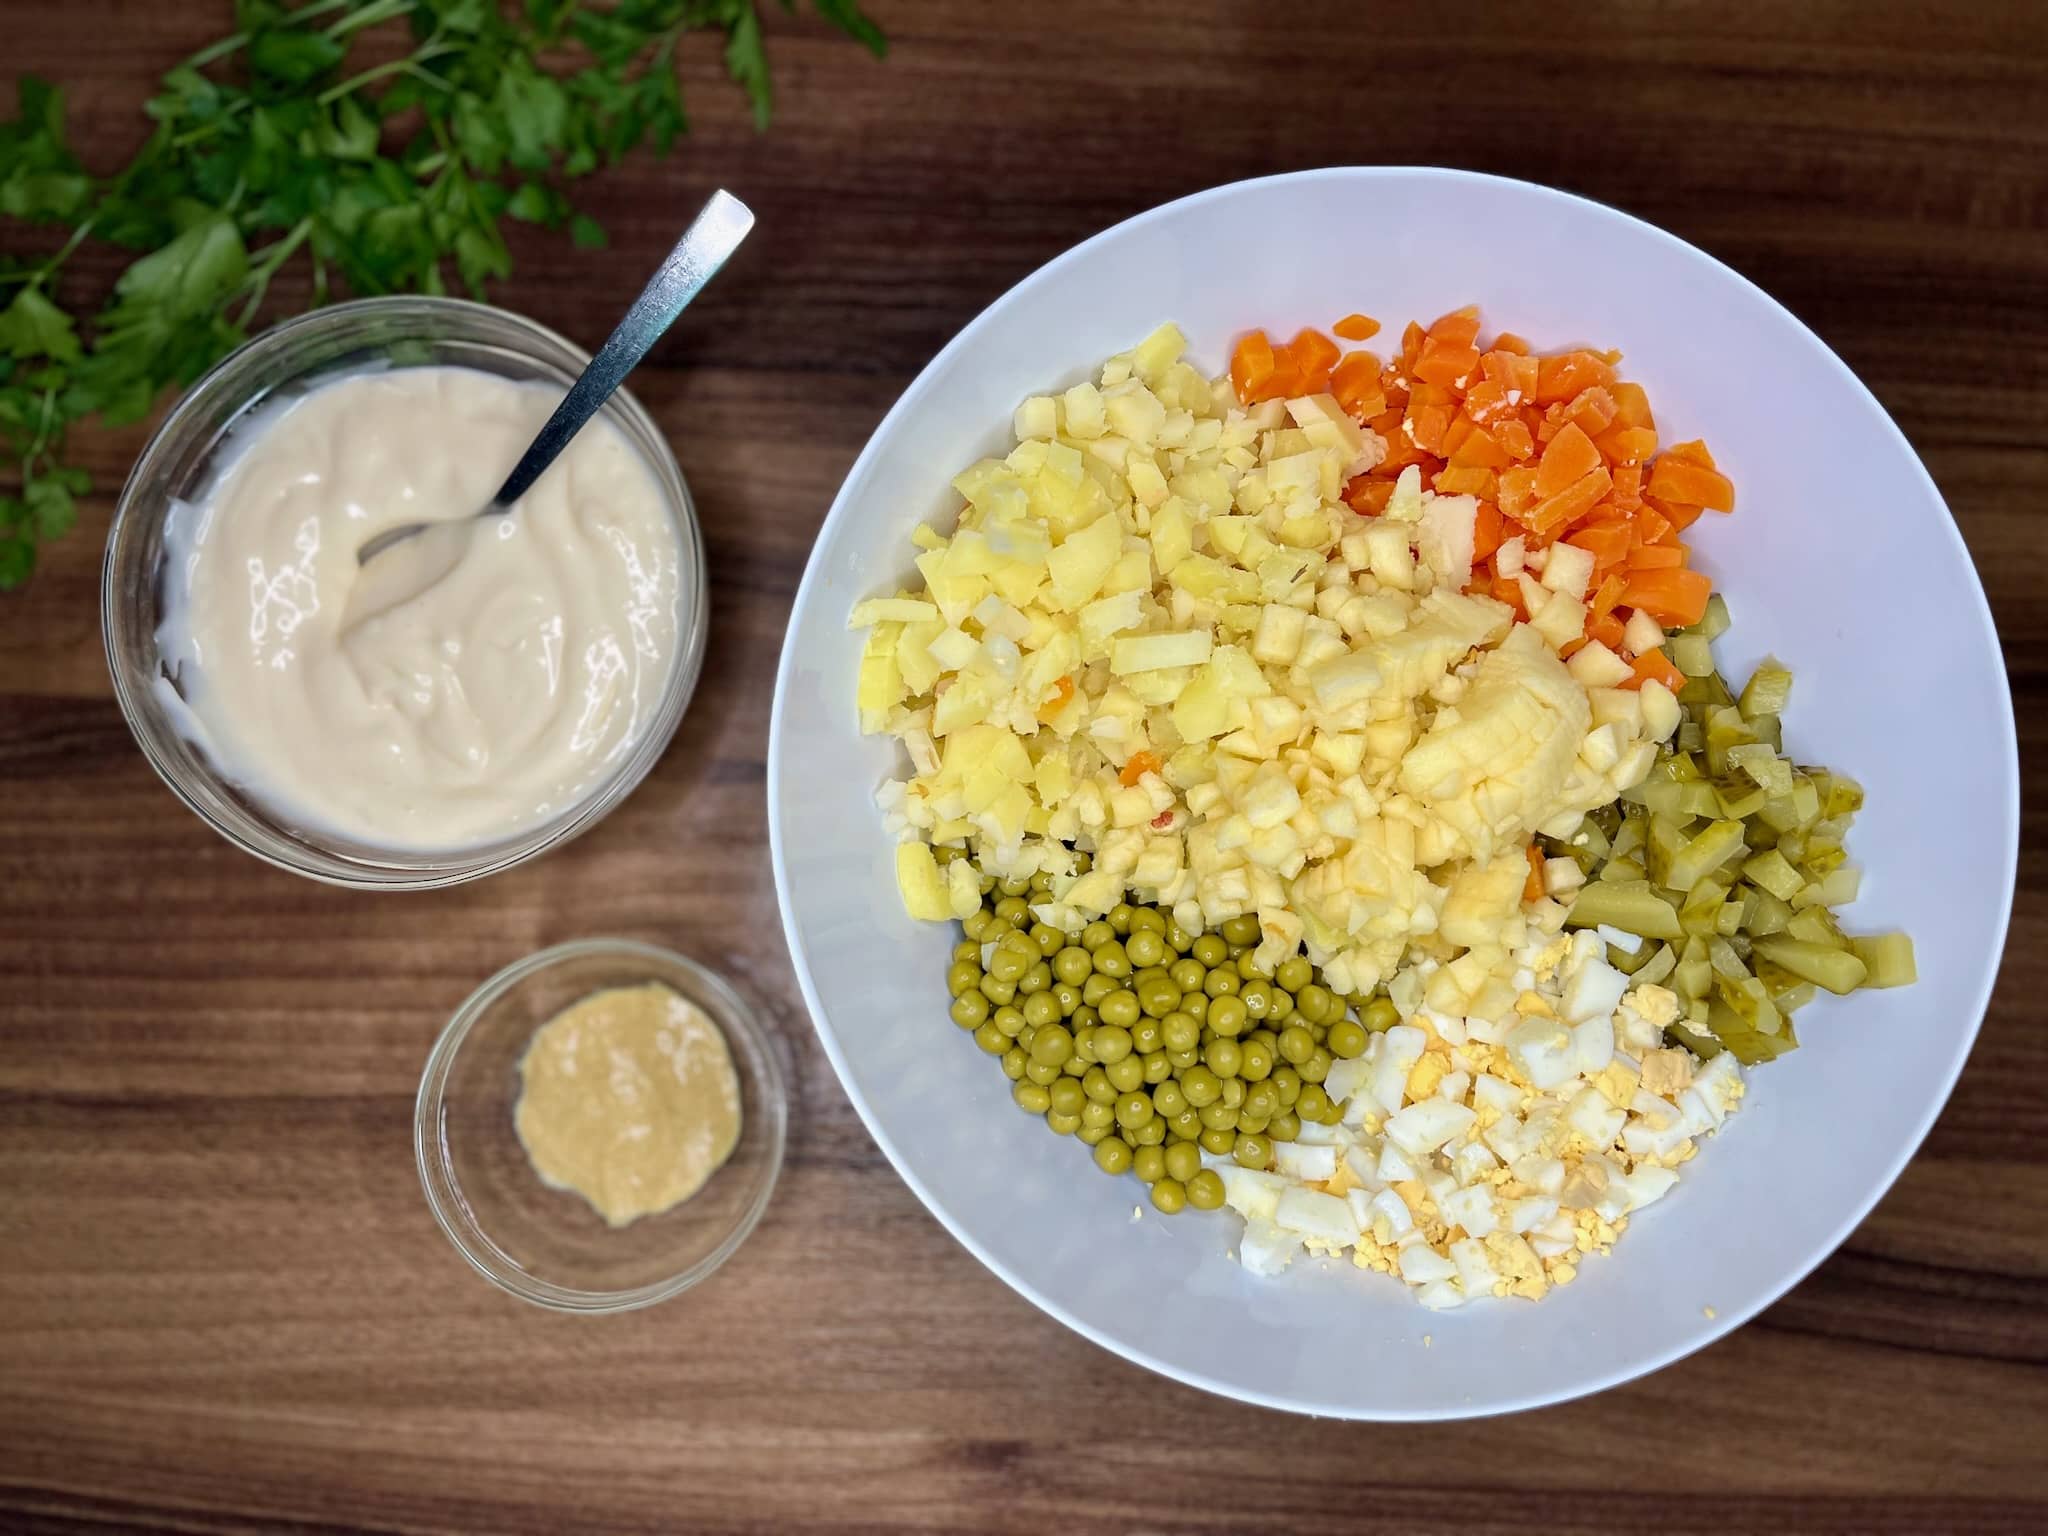 All diced ingredients are in a bowl with mayonnaise and mustard on the side